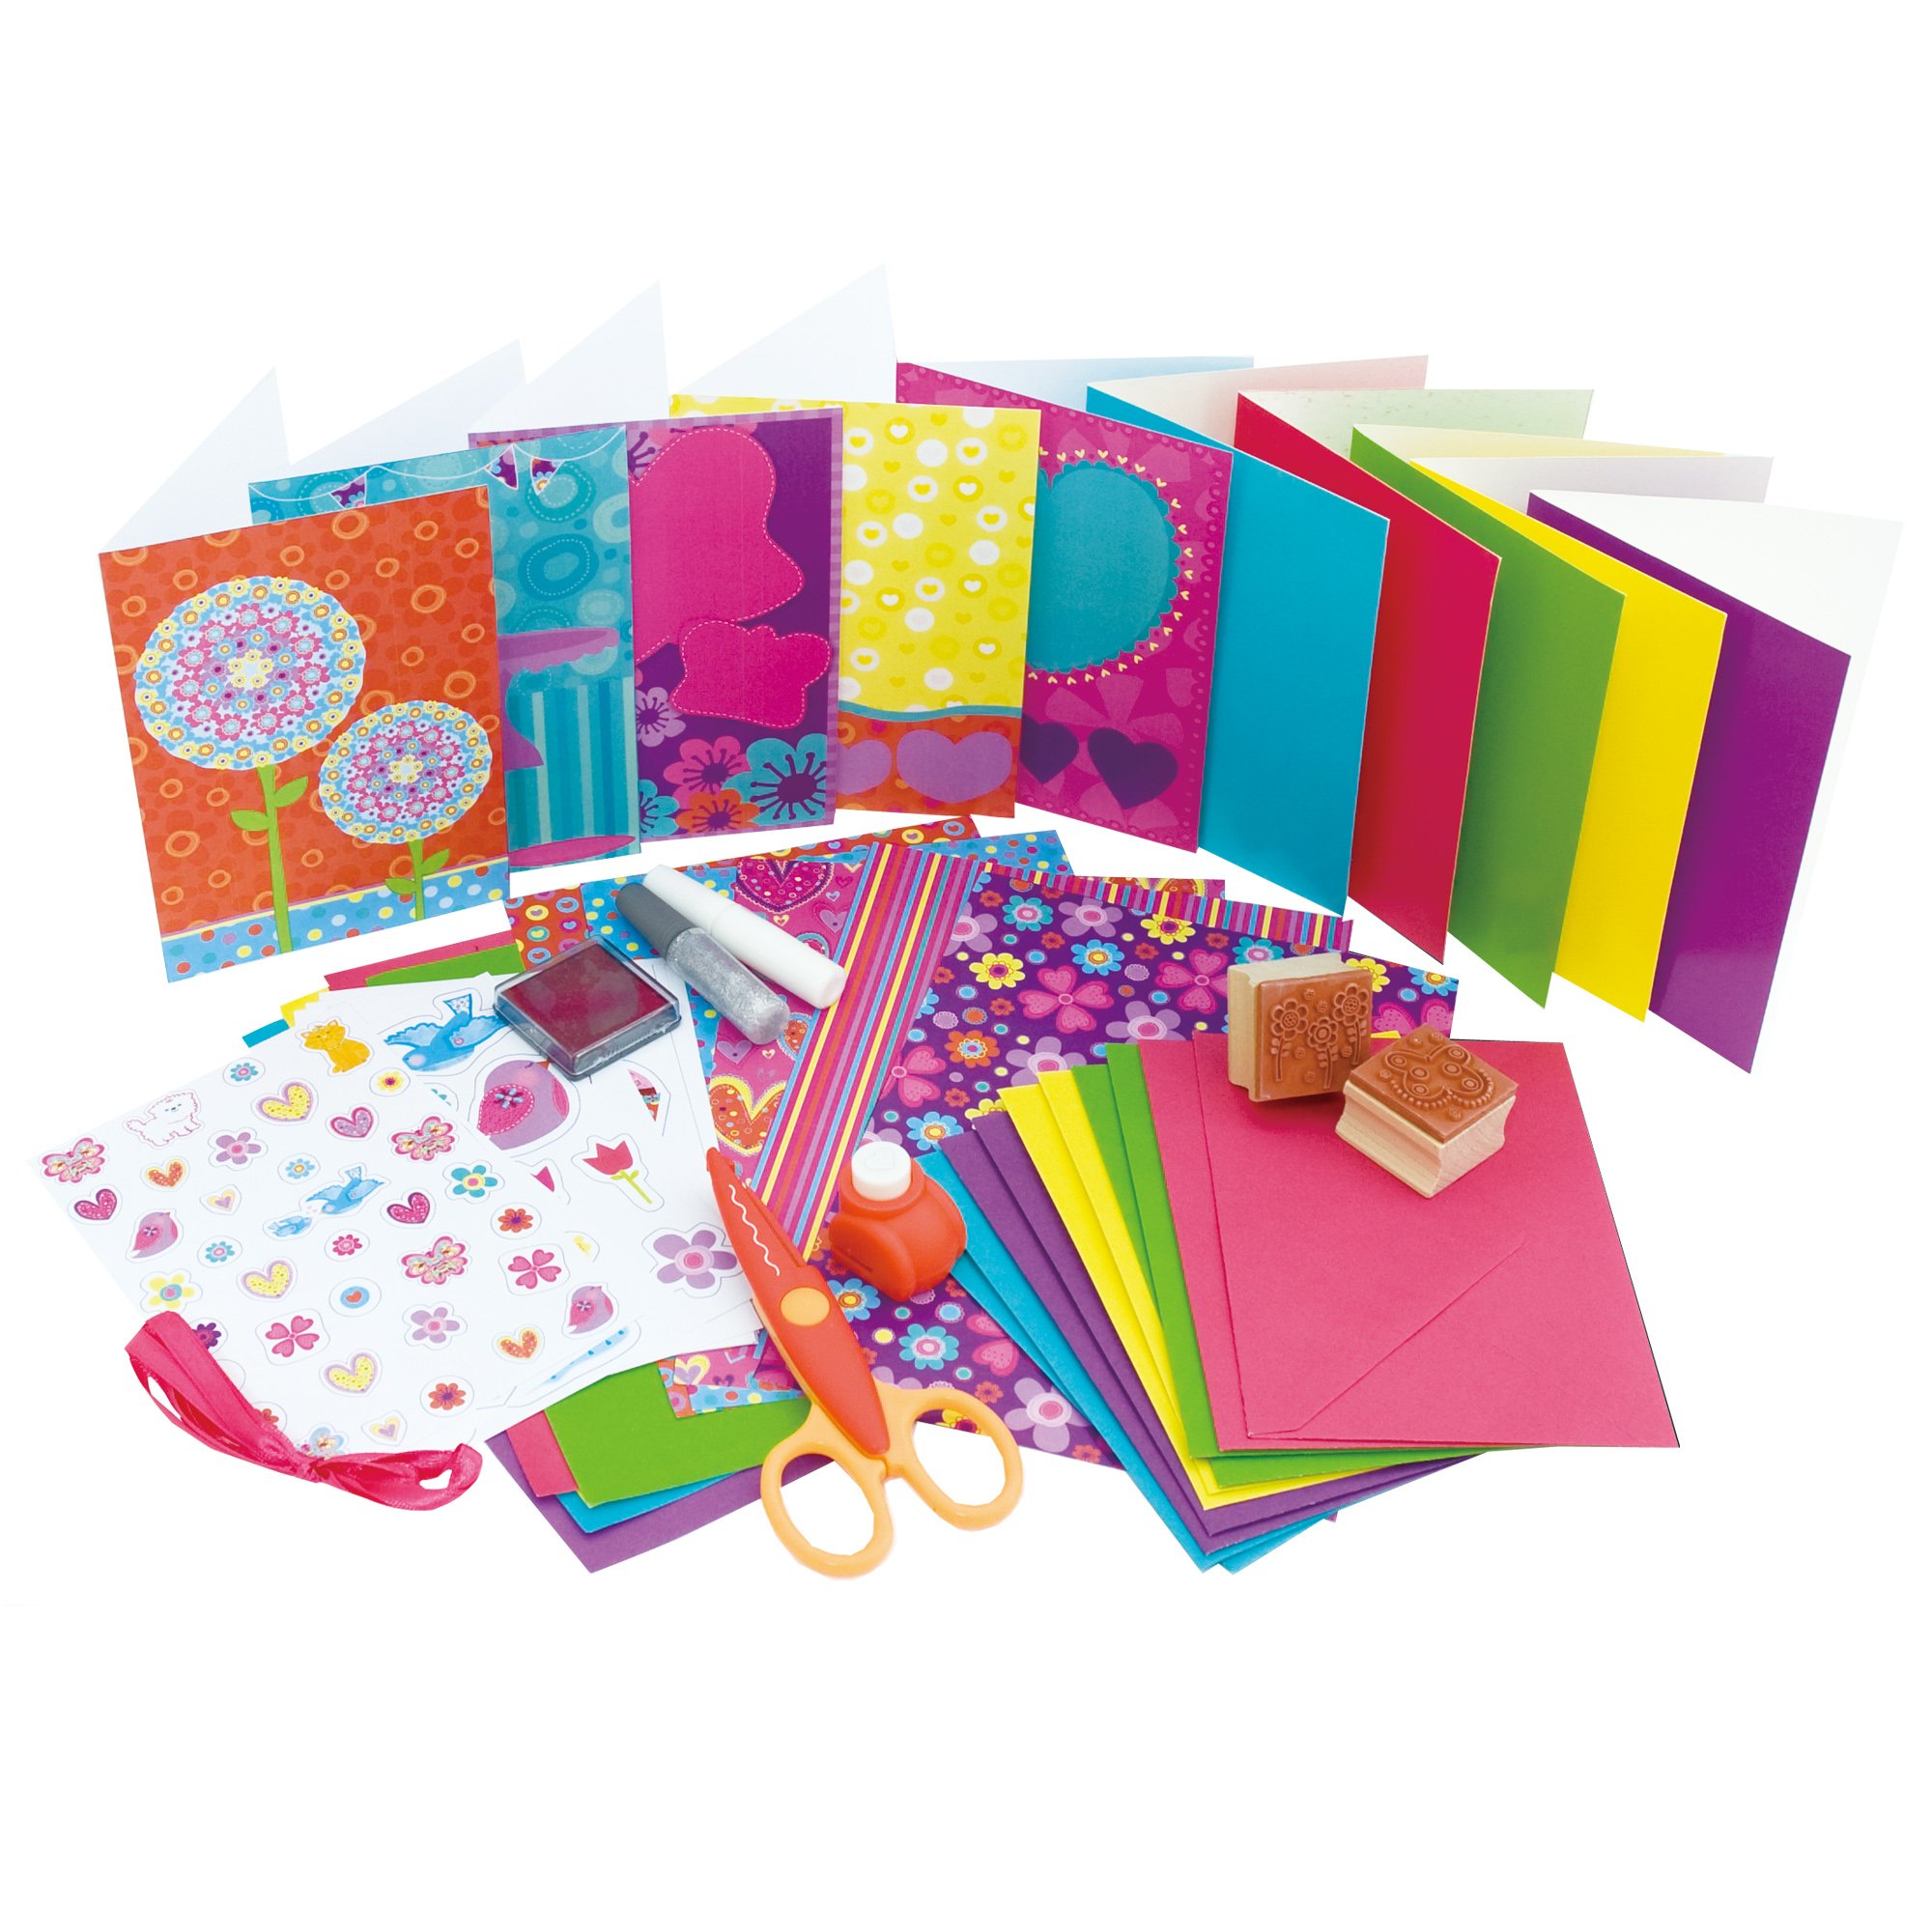 Galt Toys, Card Craft, Kids' Craft Kits, Ages 8 Years Plus